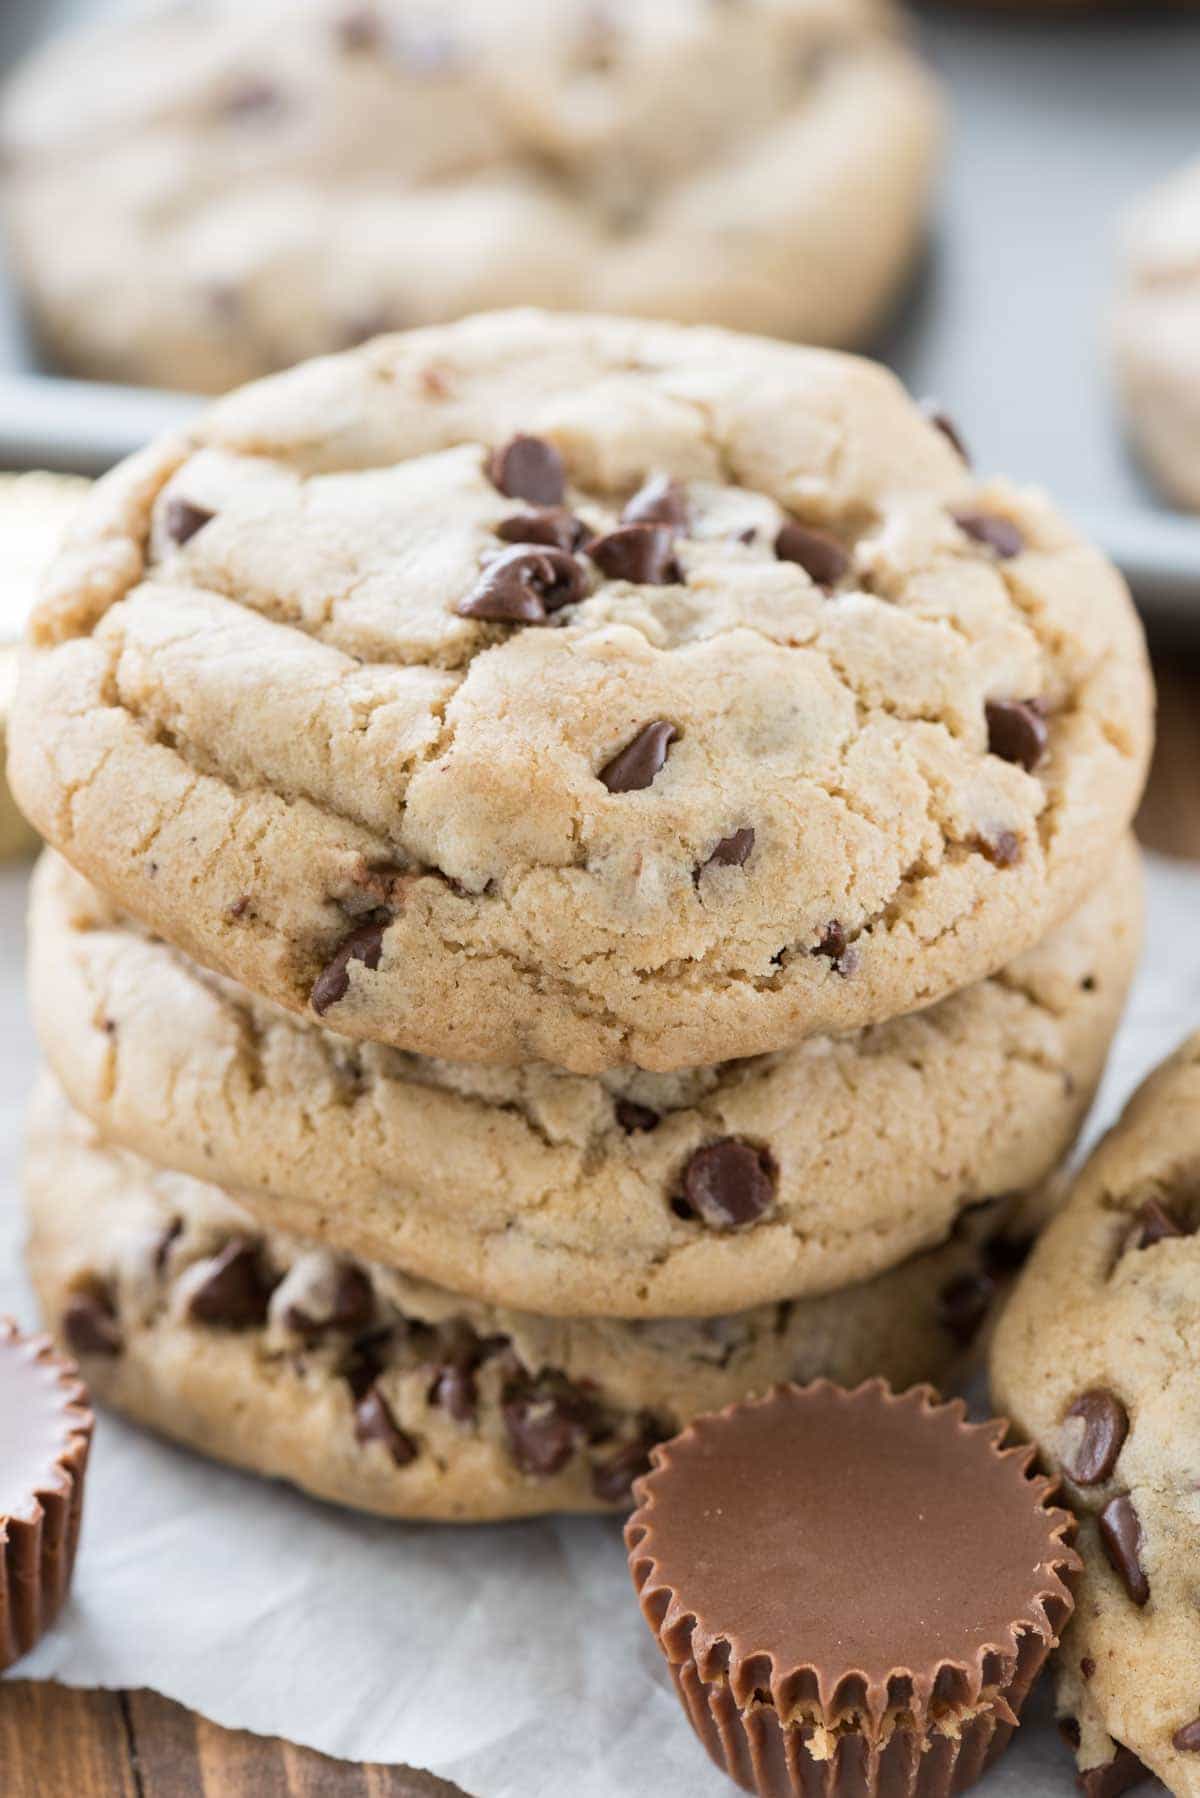 The BEST Chocolate Chip Cookie Recipe STUFFED with peanut butter cups!